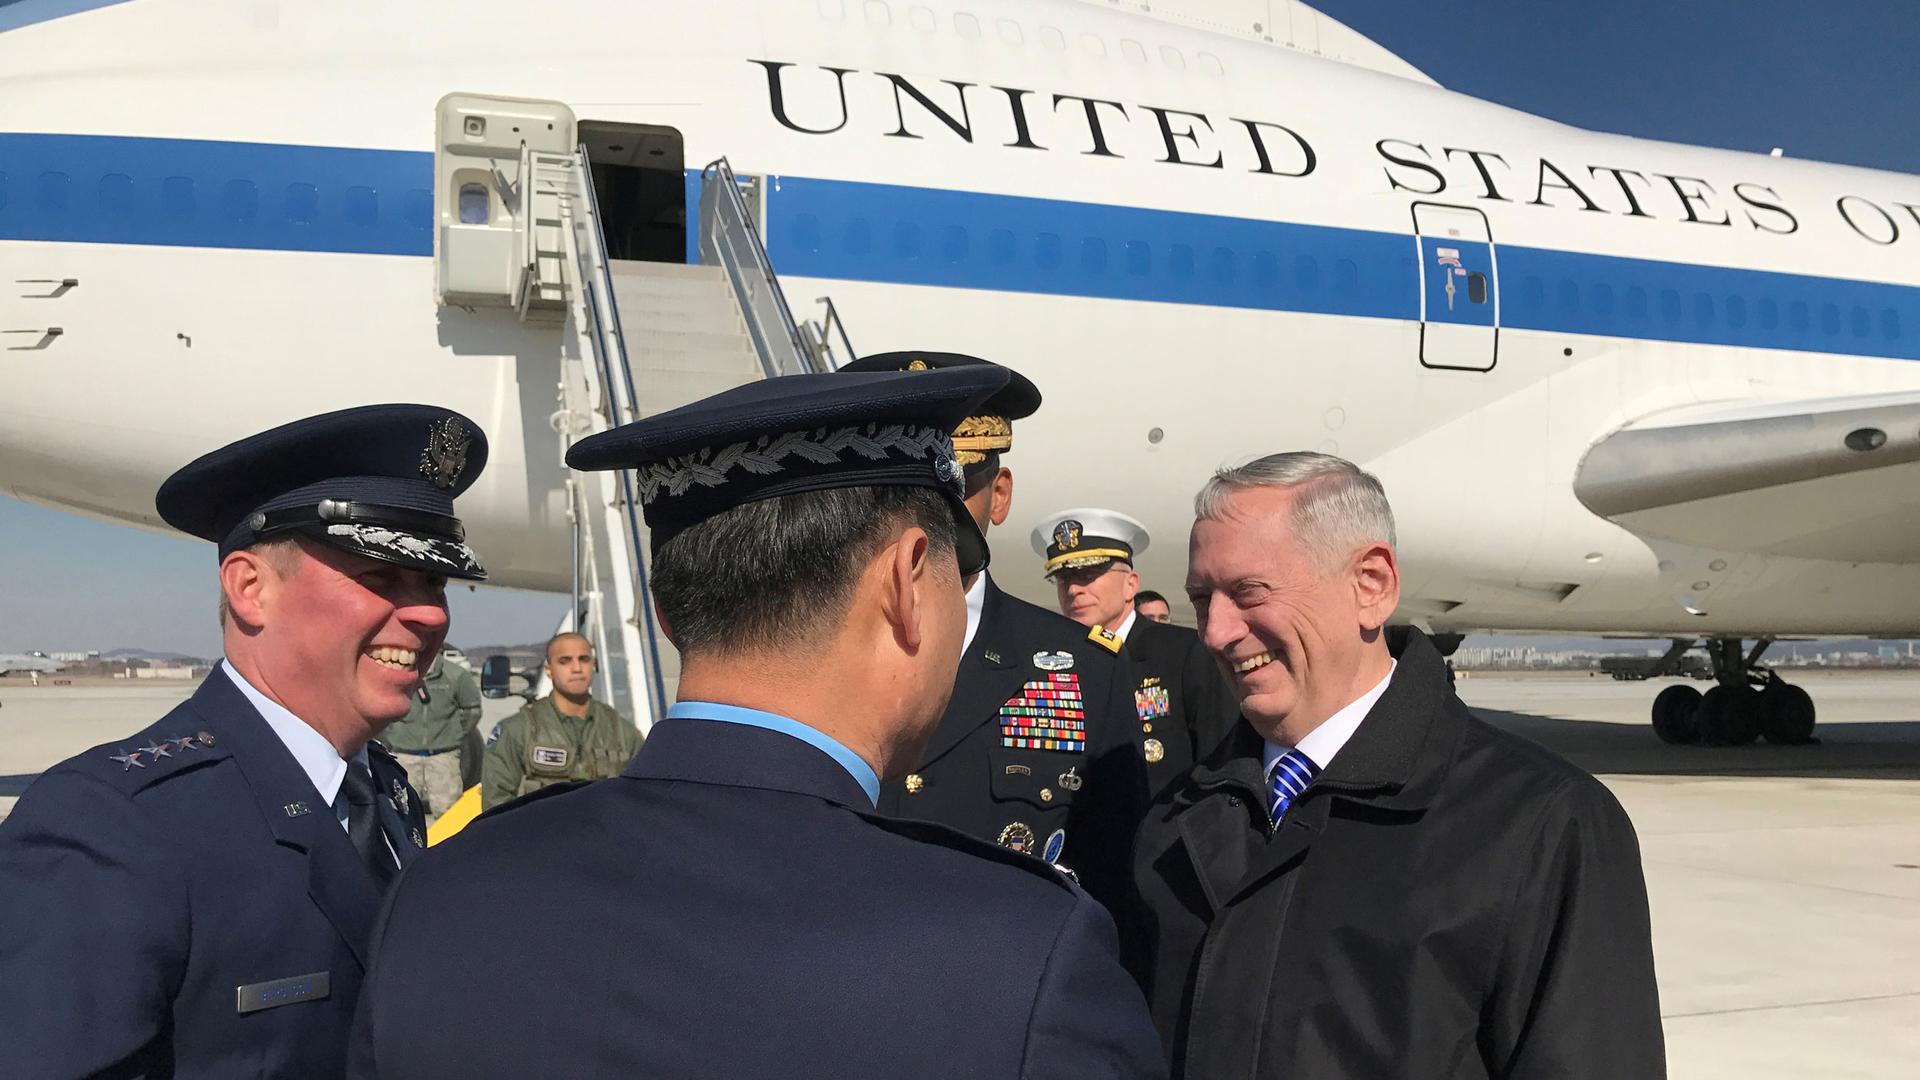 US Defense Secretary Mattis stands on a tarmac in front of a US airplane and talks with military men in uniform